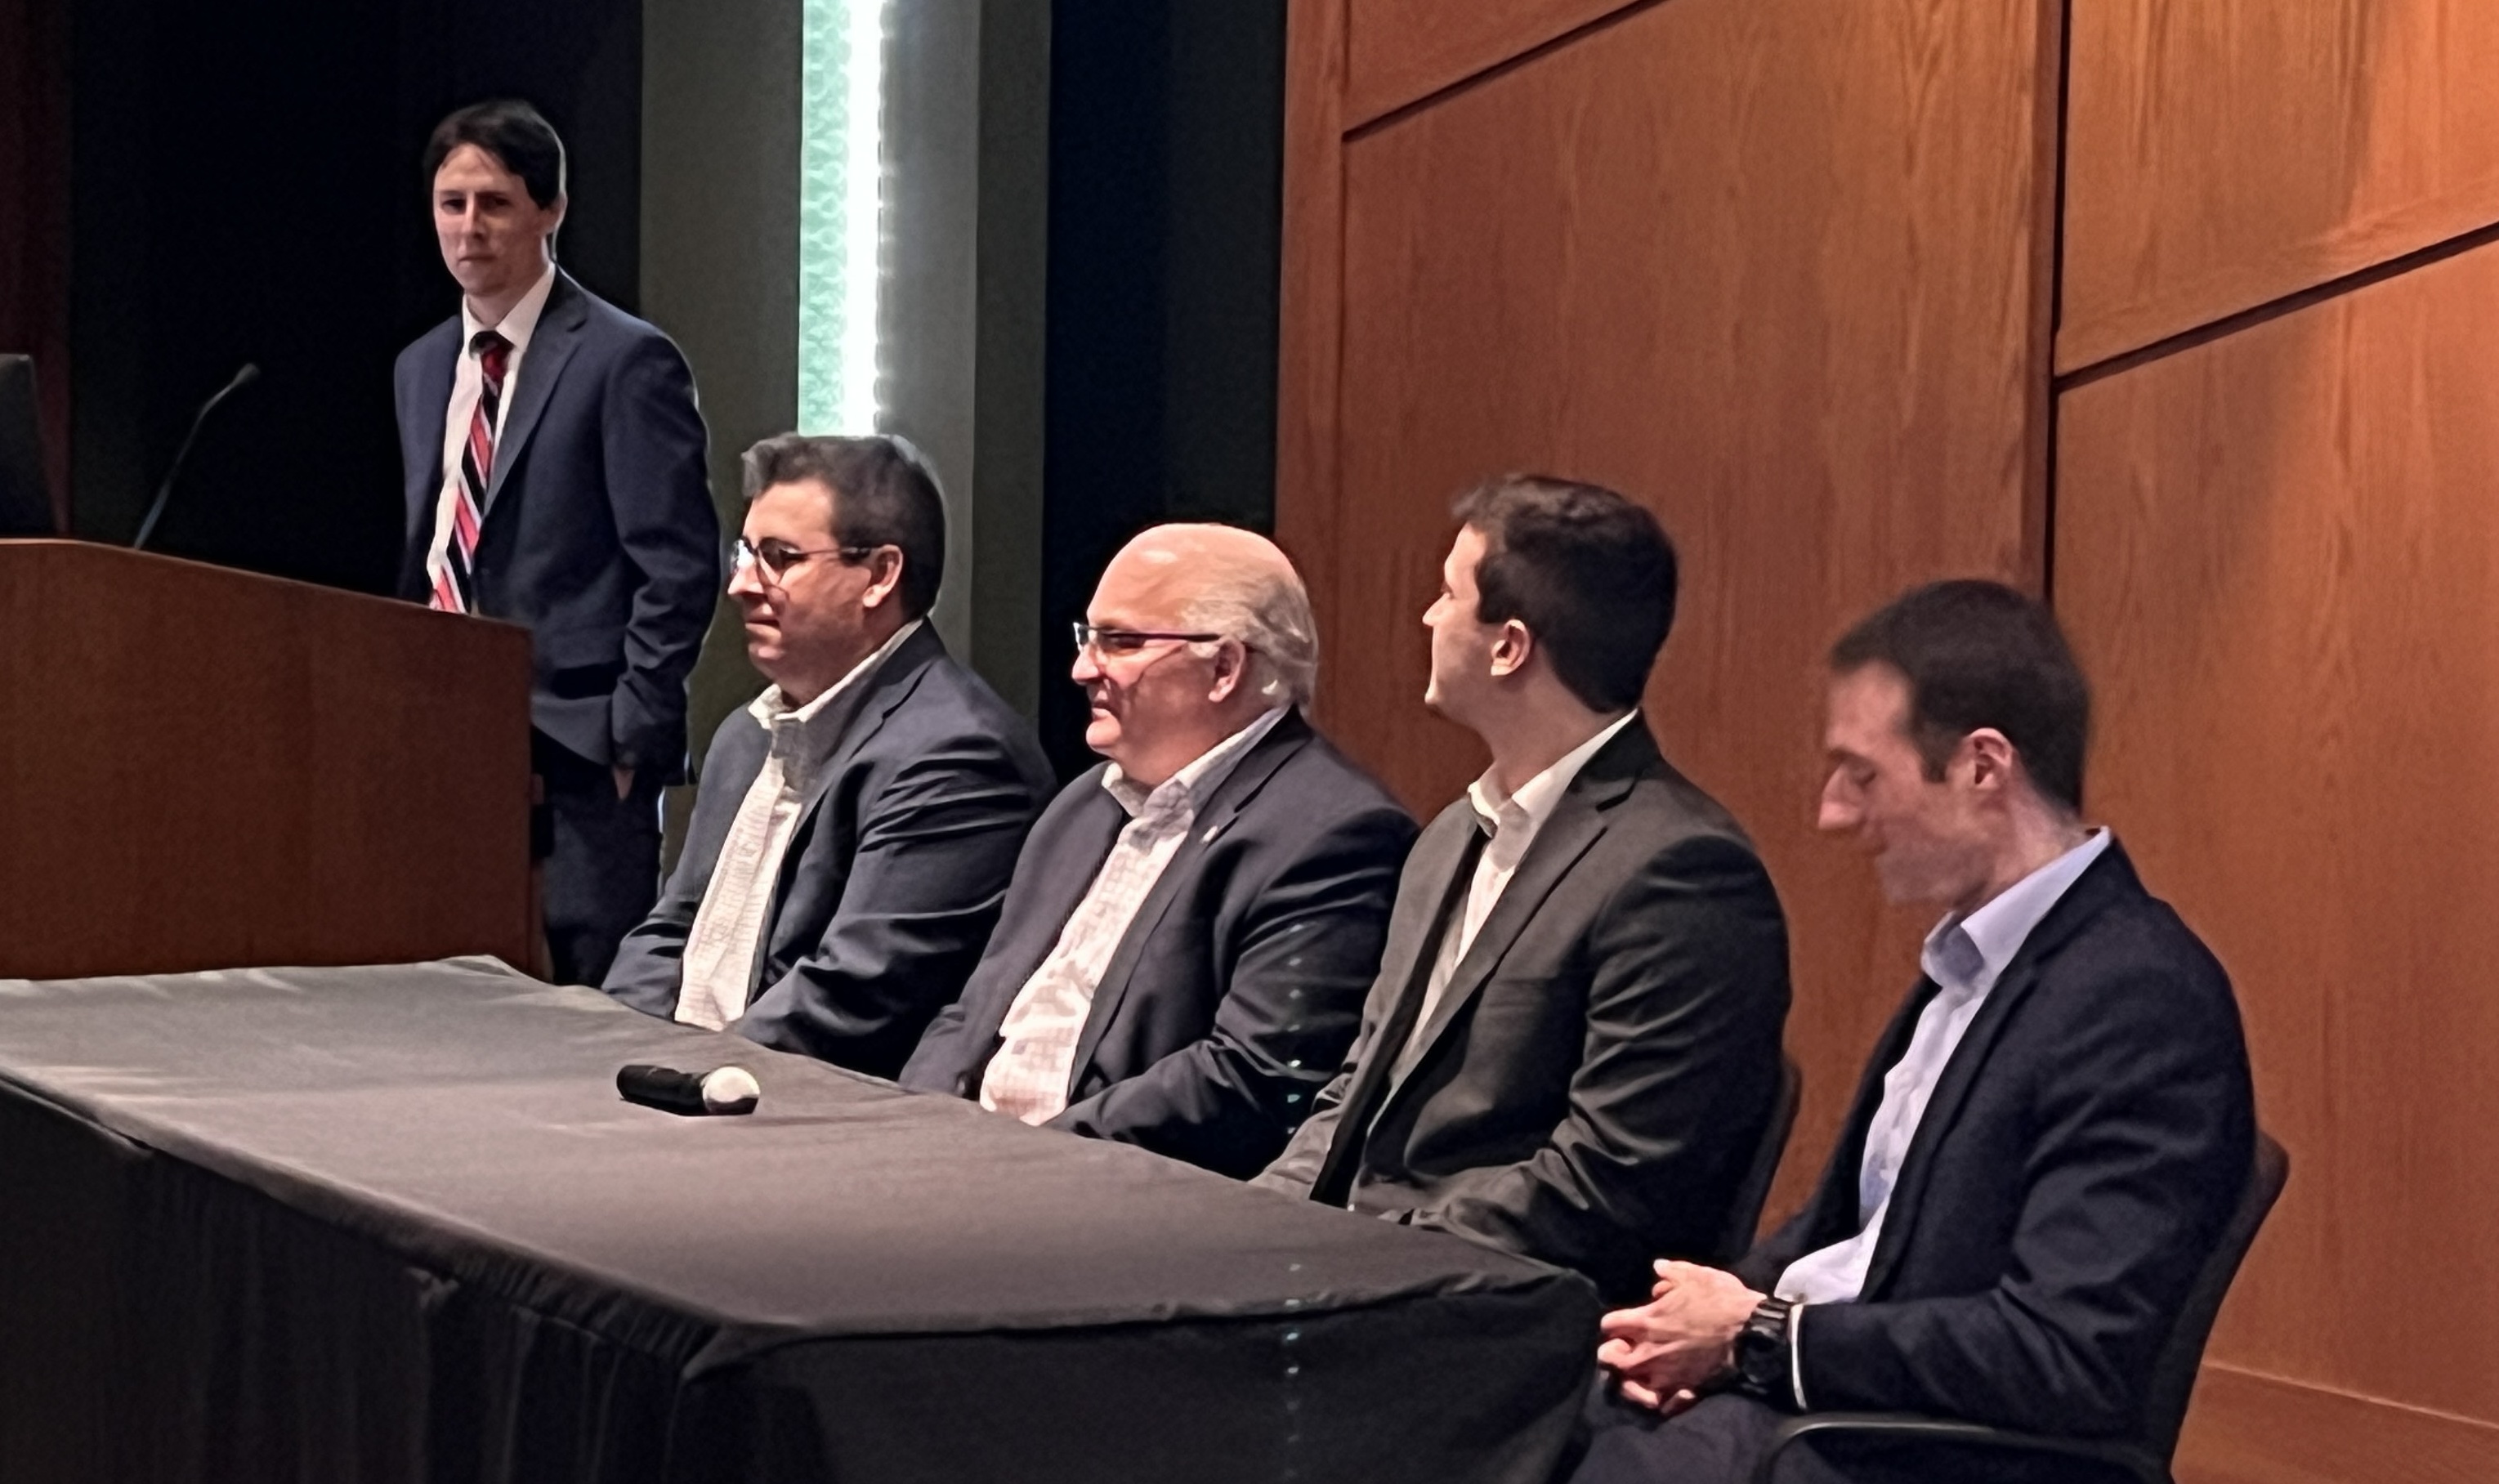  Panel moderator (far left) Dr. Justin Petrovich and panelists (left to right) Zachary Bono, John Murray, Jordan Sabol and Patrick O’Reilly.